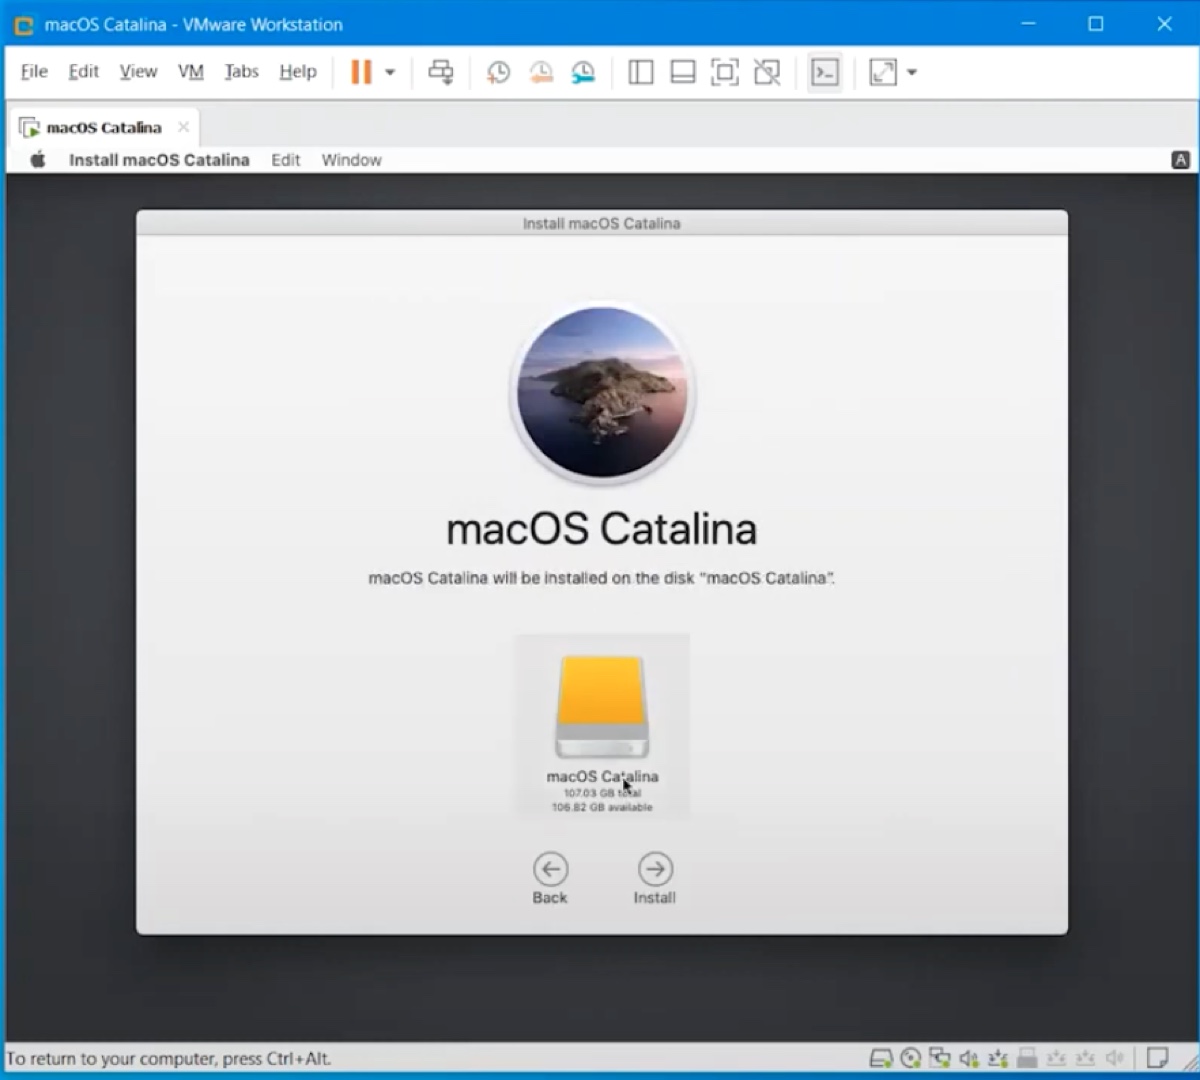 Choose to install macOS Catalina on the virtual disk